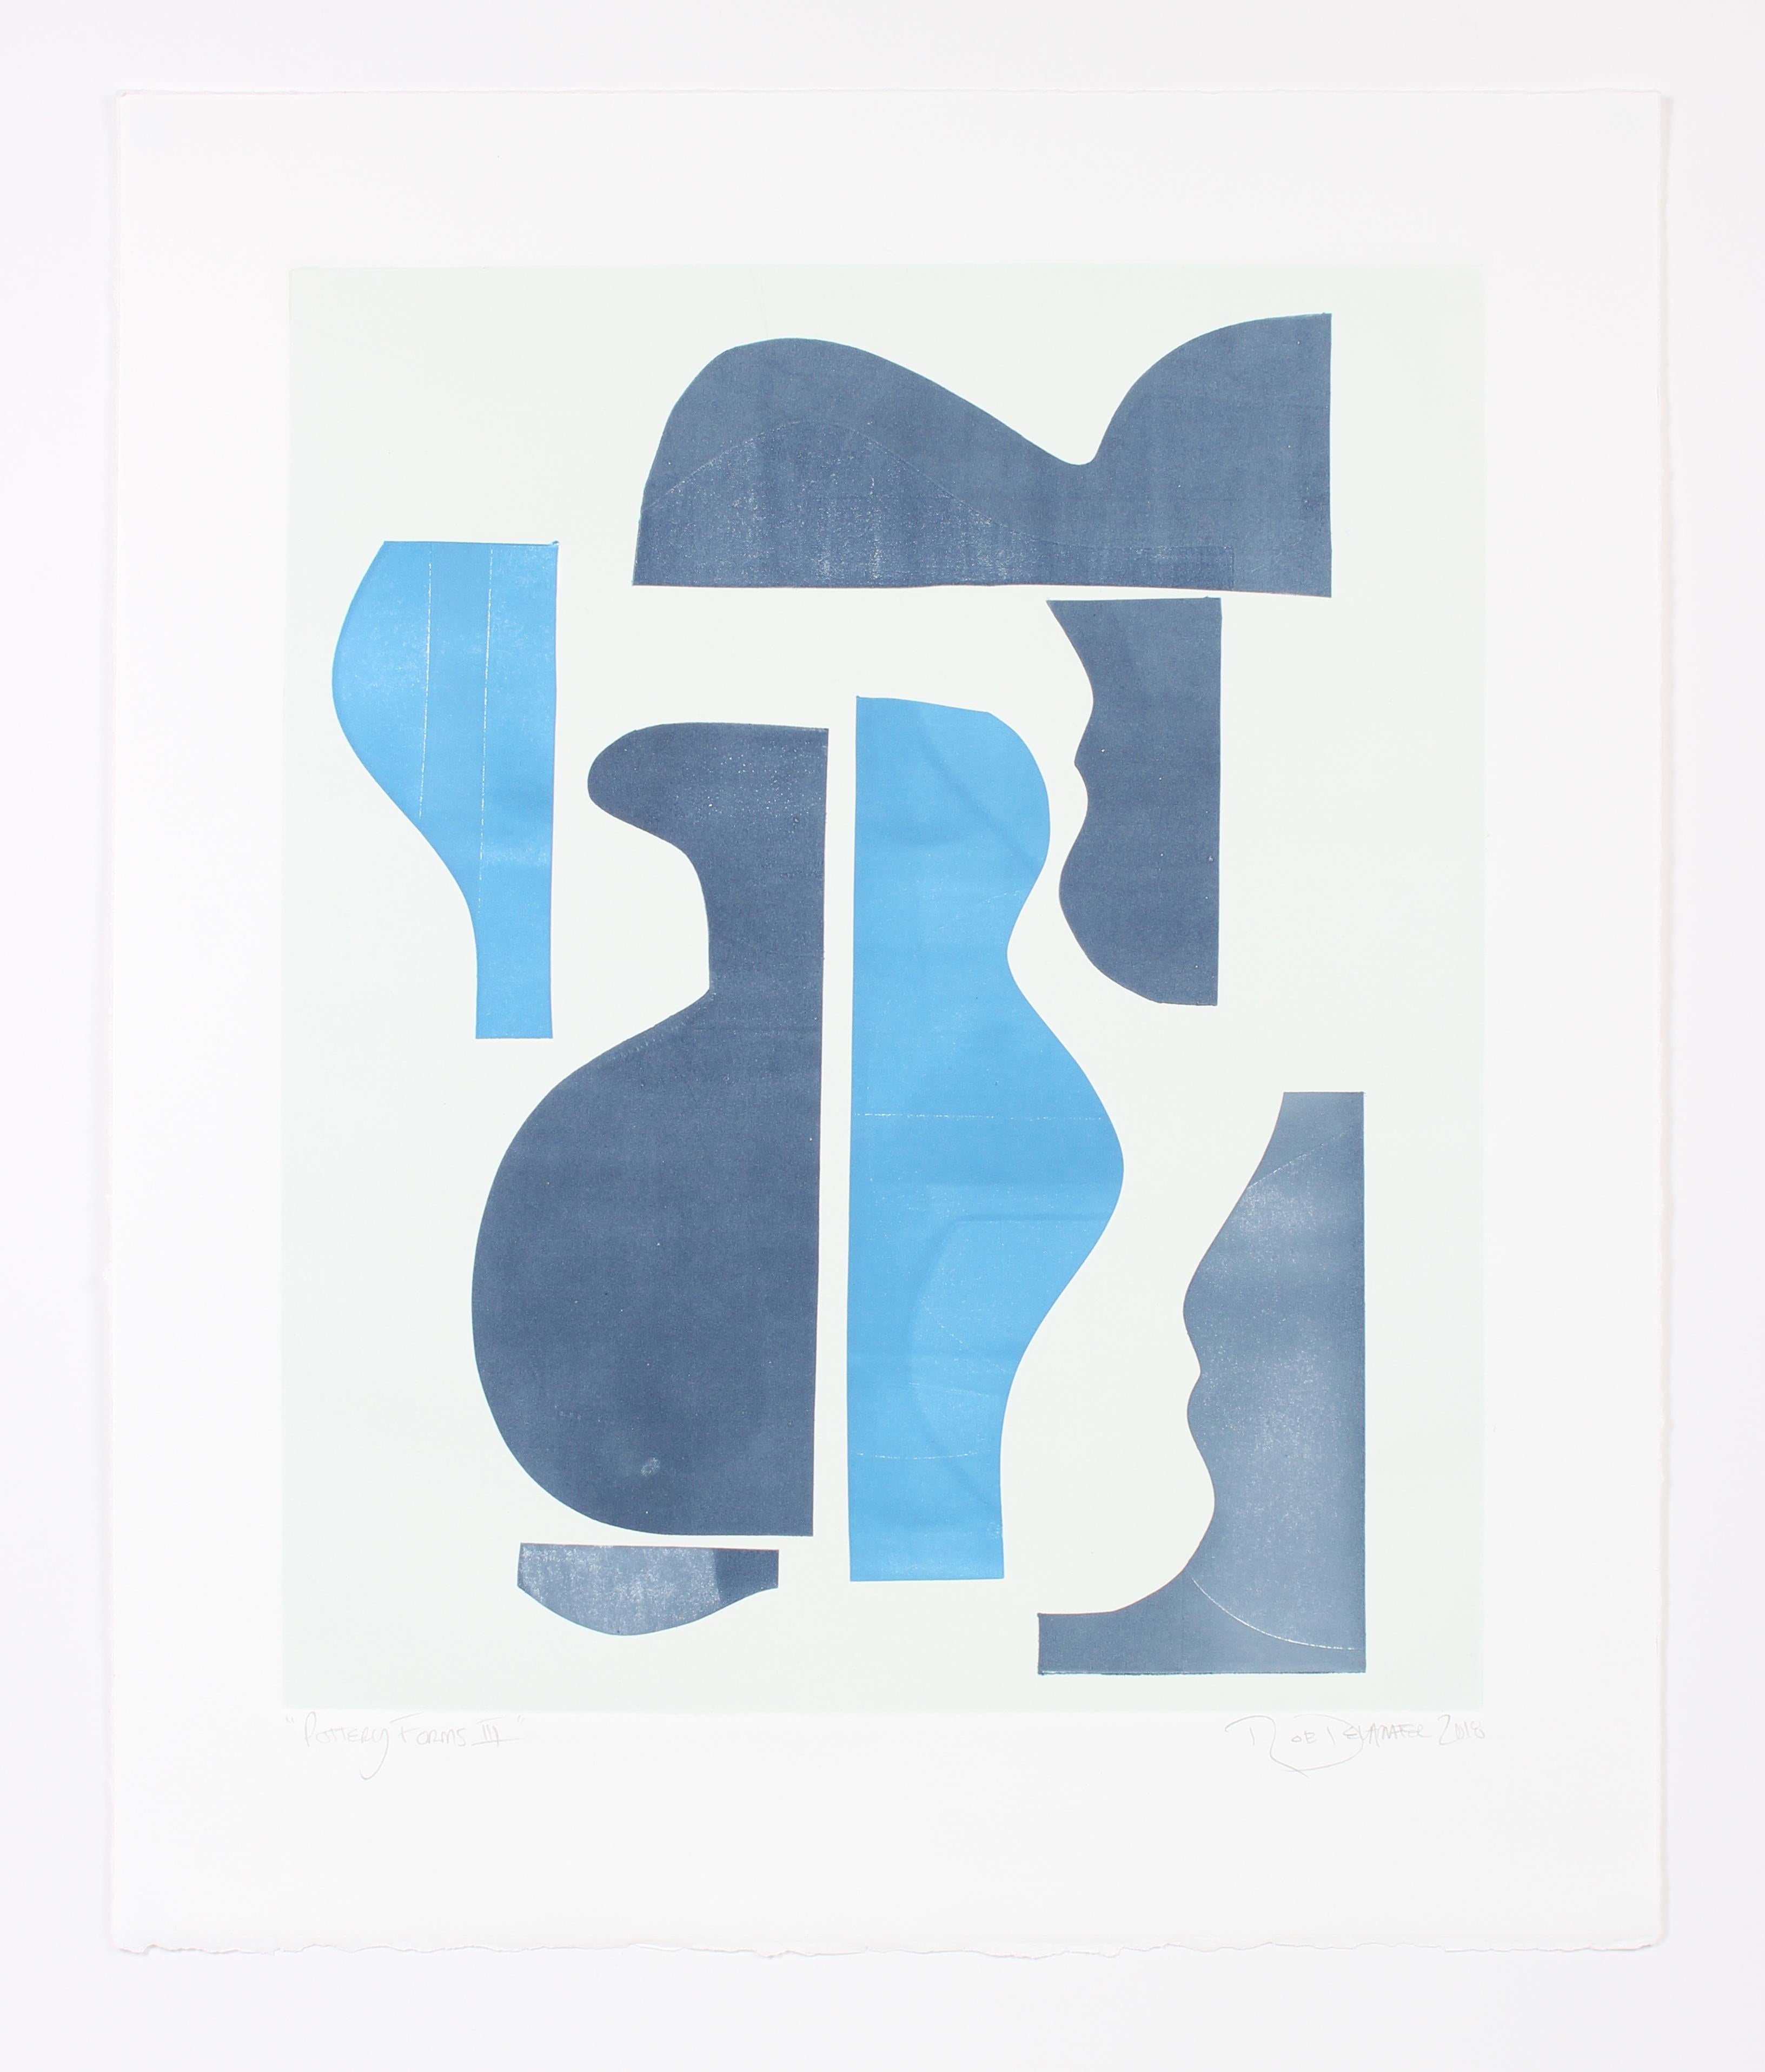 Rob Delamater Abstract Print - "Pottery Forms III" Abstract Monotype on Paper in Navy and Baby Blue, 2018